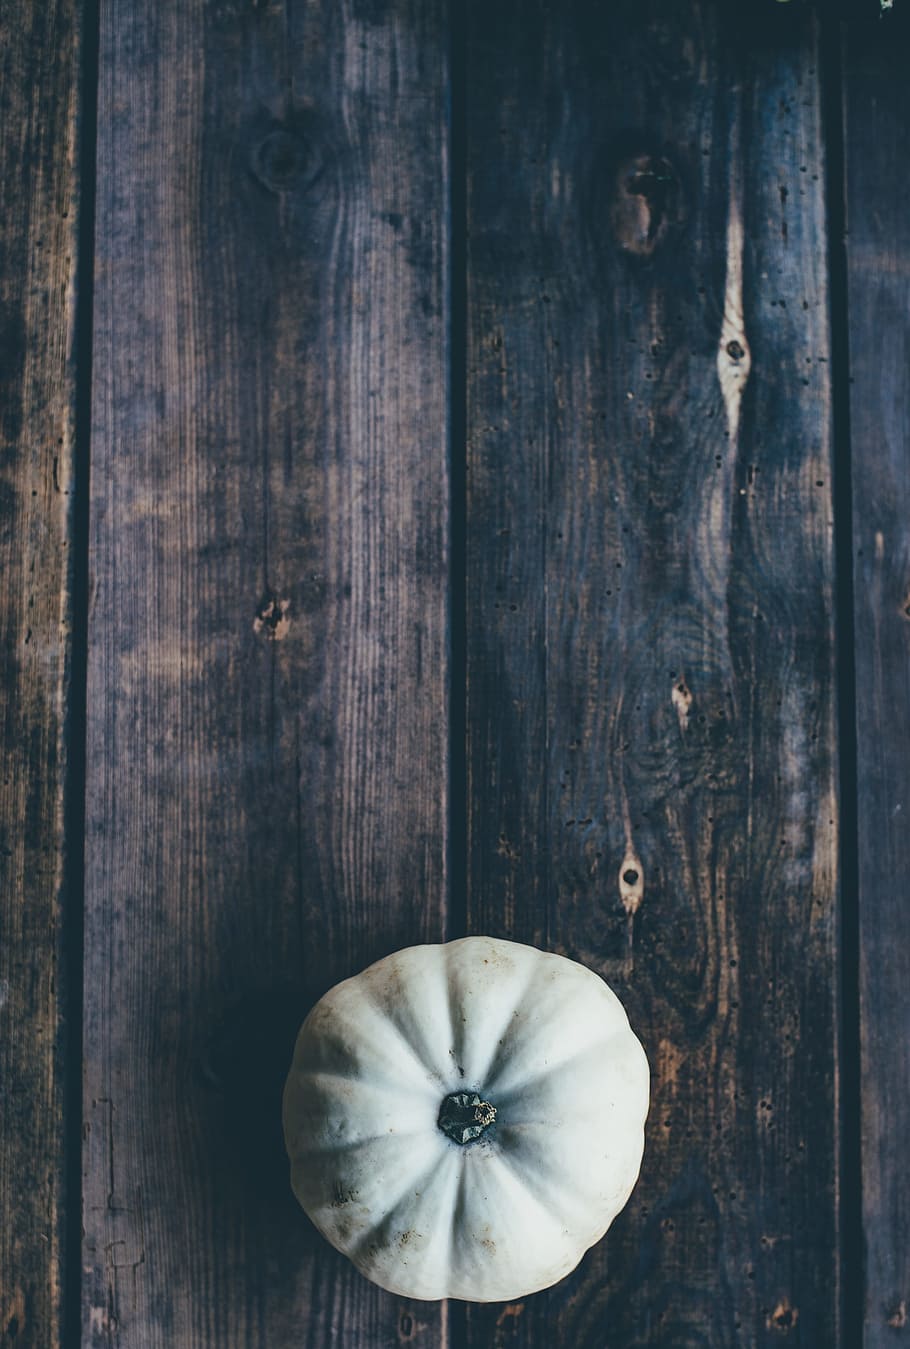 black, gray, planks, pumpkins, tables, wood, wood - material, indoors, close-up, old